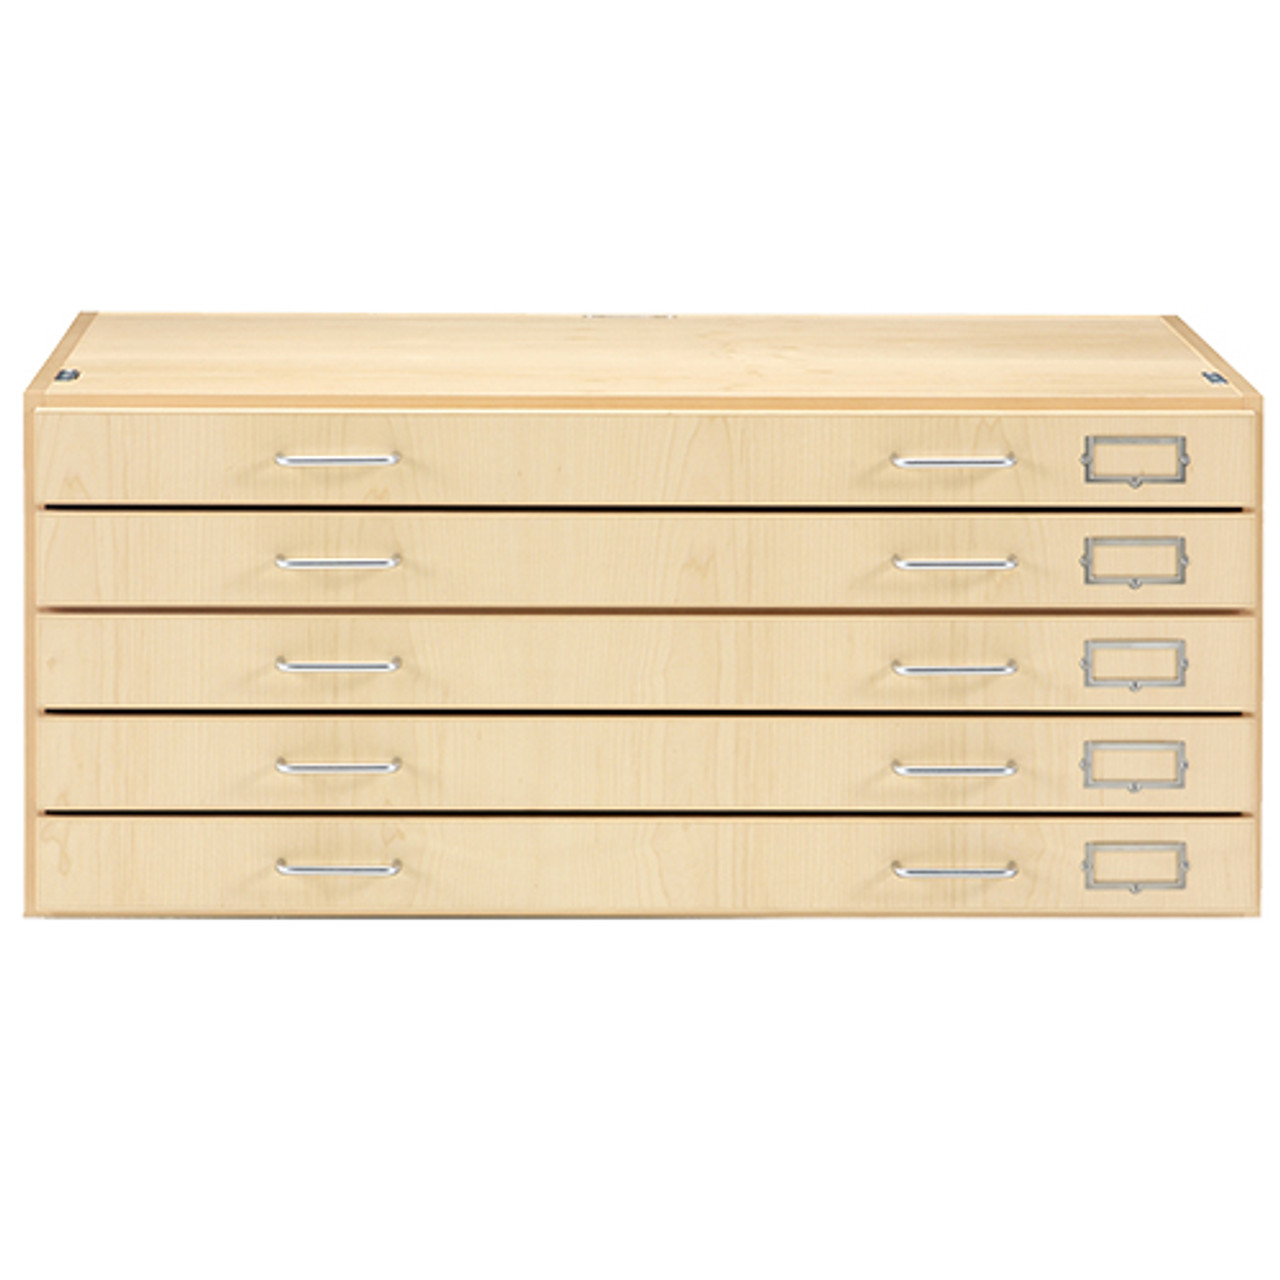 Diversified Spaces Flat File System Stackable 5 Drawer Cabinet ( Maple ) -  FFS-3624M, Flat File & Paper Storage